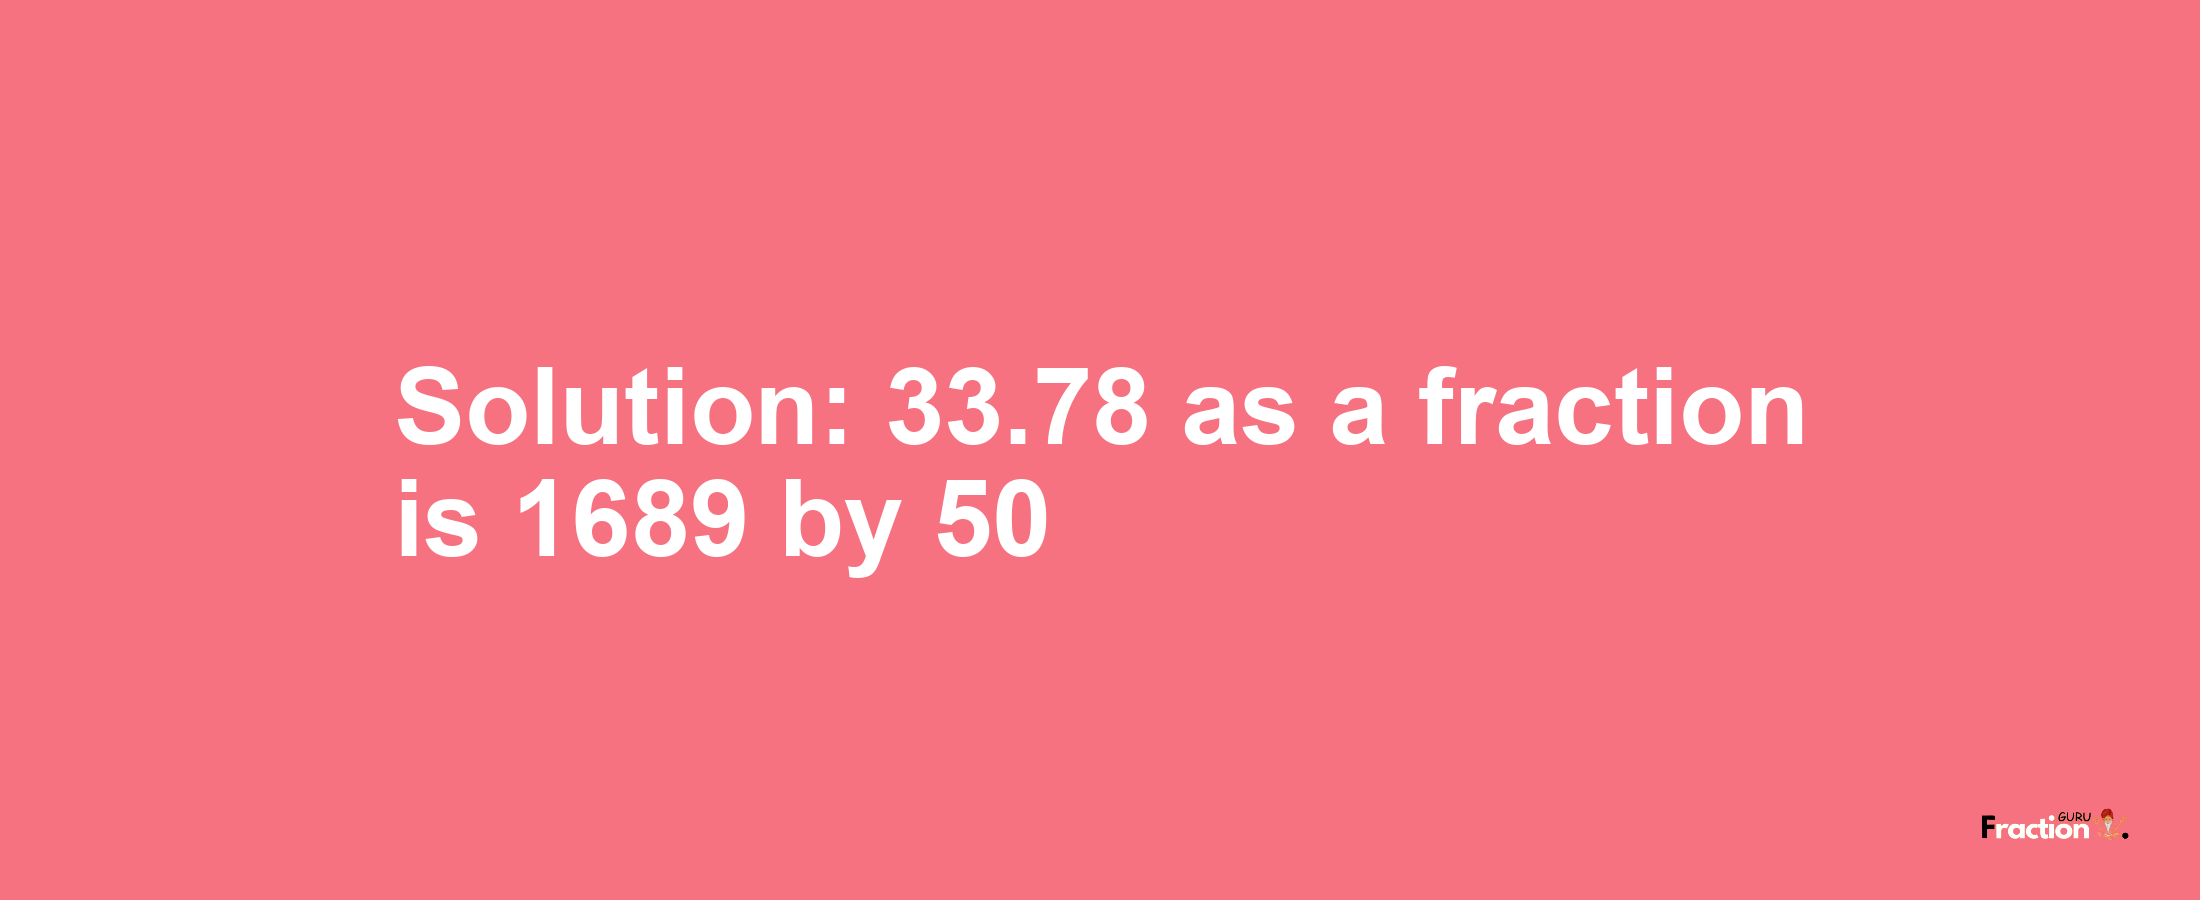 Solution:33.78 as a fraction is 1689/50